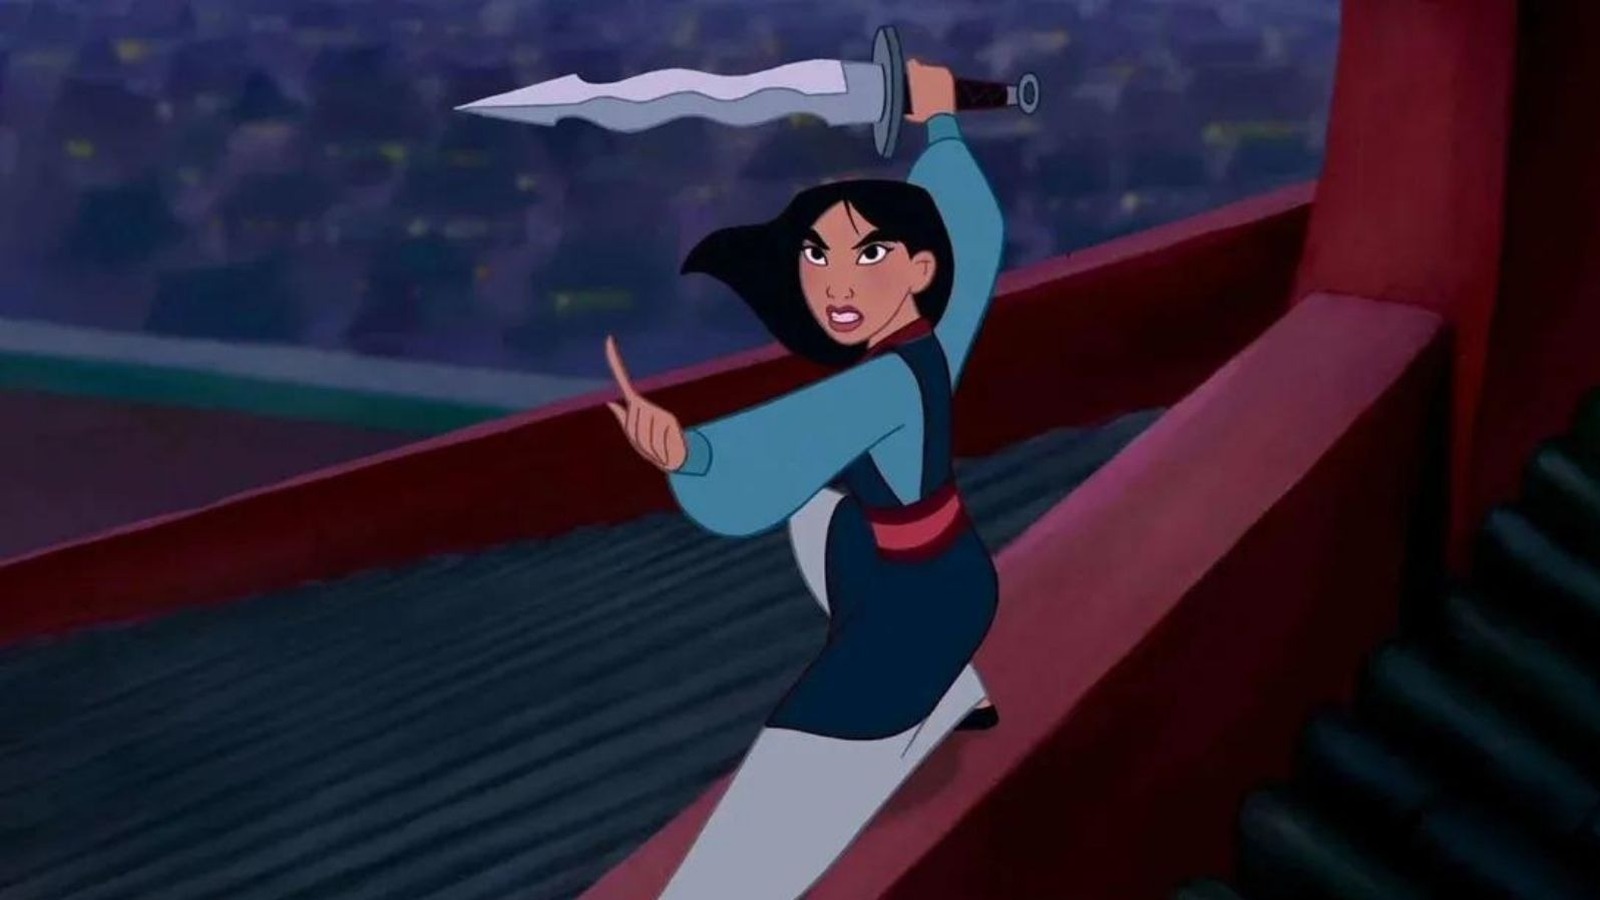 was the disney movie mulan based on a real person or was mulan a myth